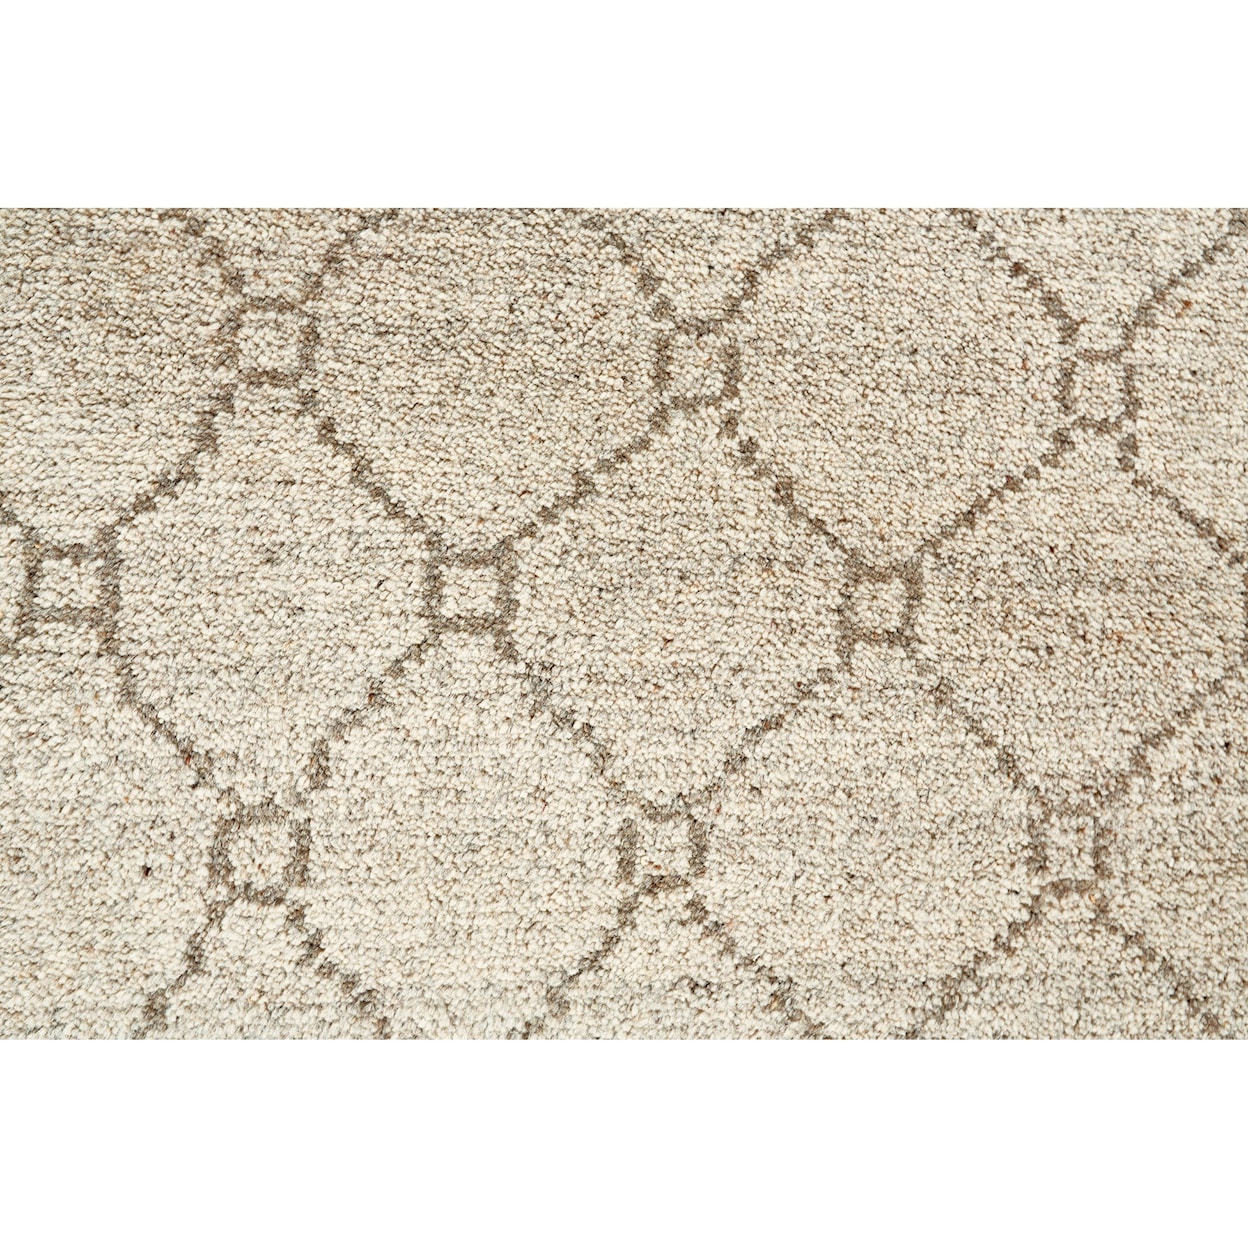 Feizy Rugs Barbary Natural/Ecru 9'-6" x 13'-6" Area Rug